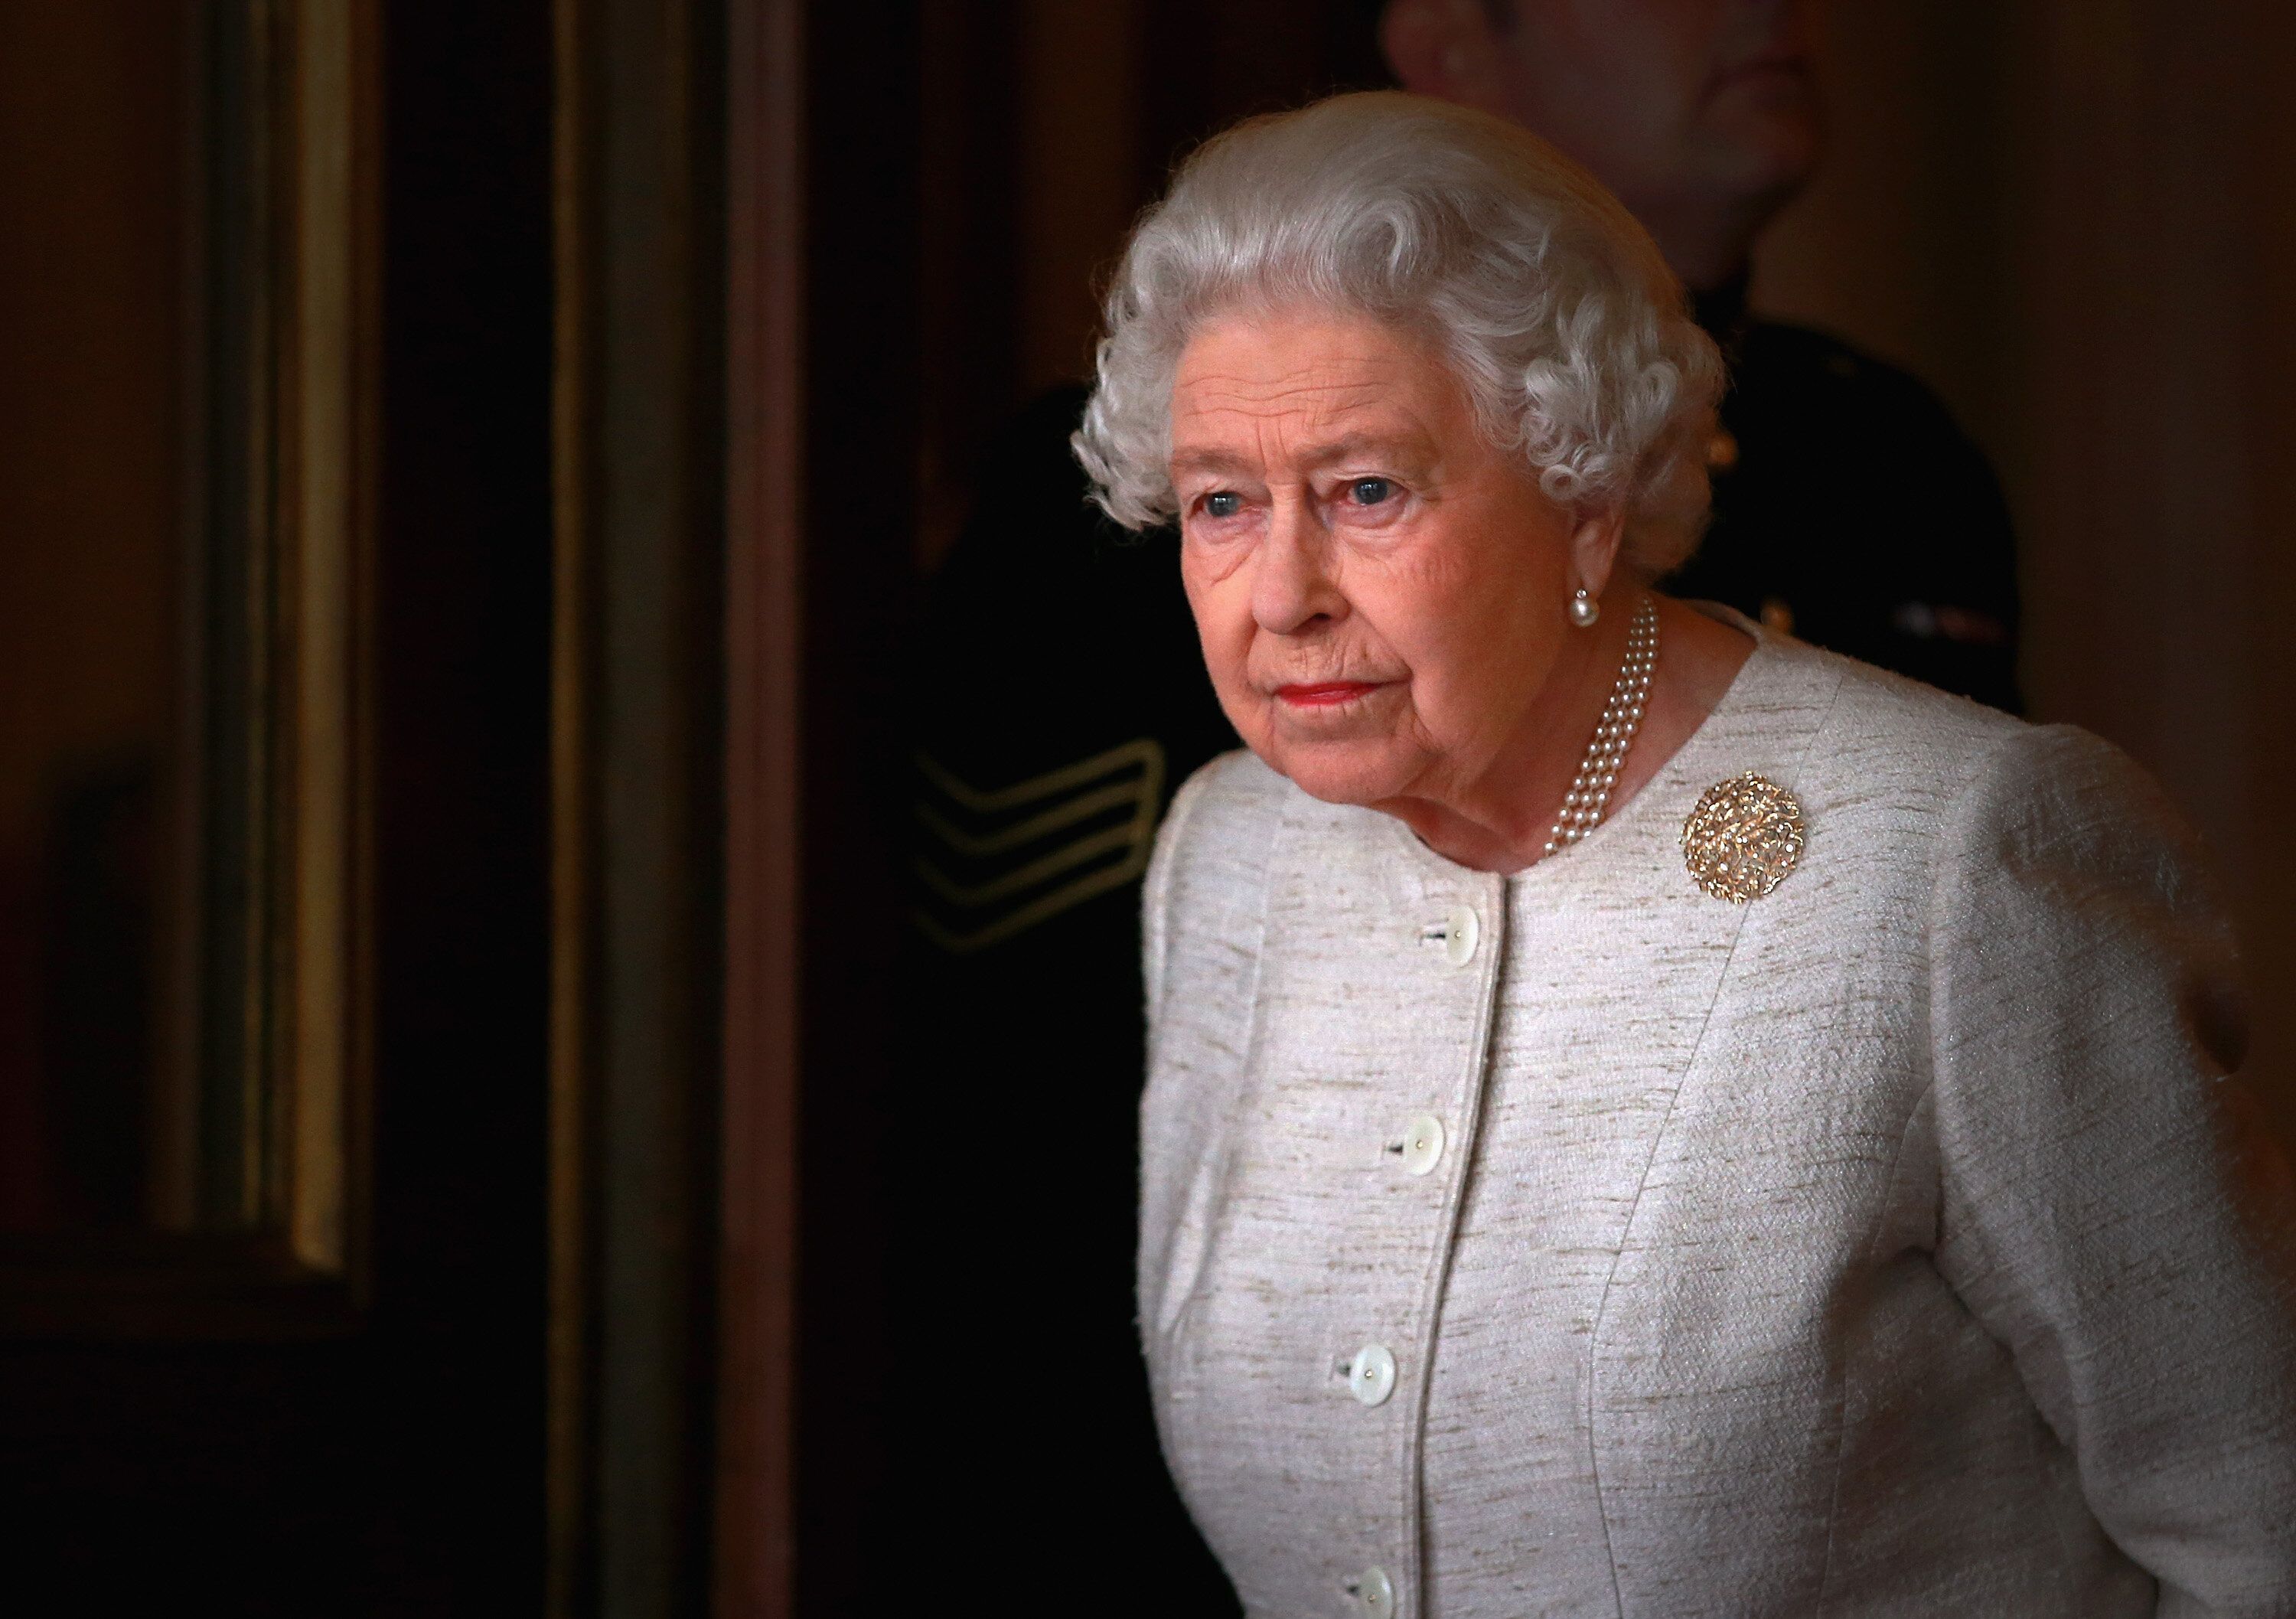 The British royal family has faced renewed reports of racism since early this year.